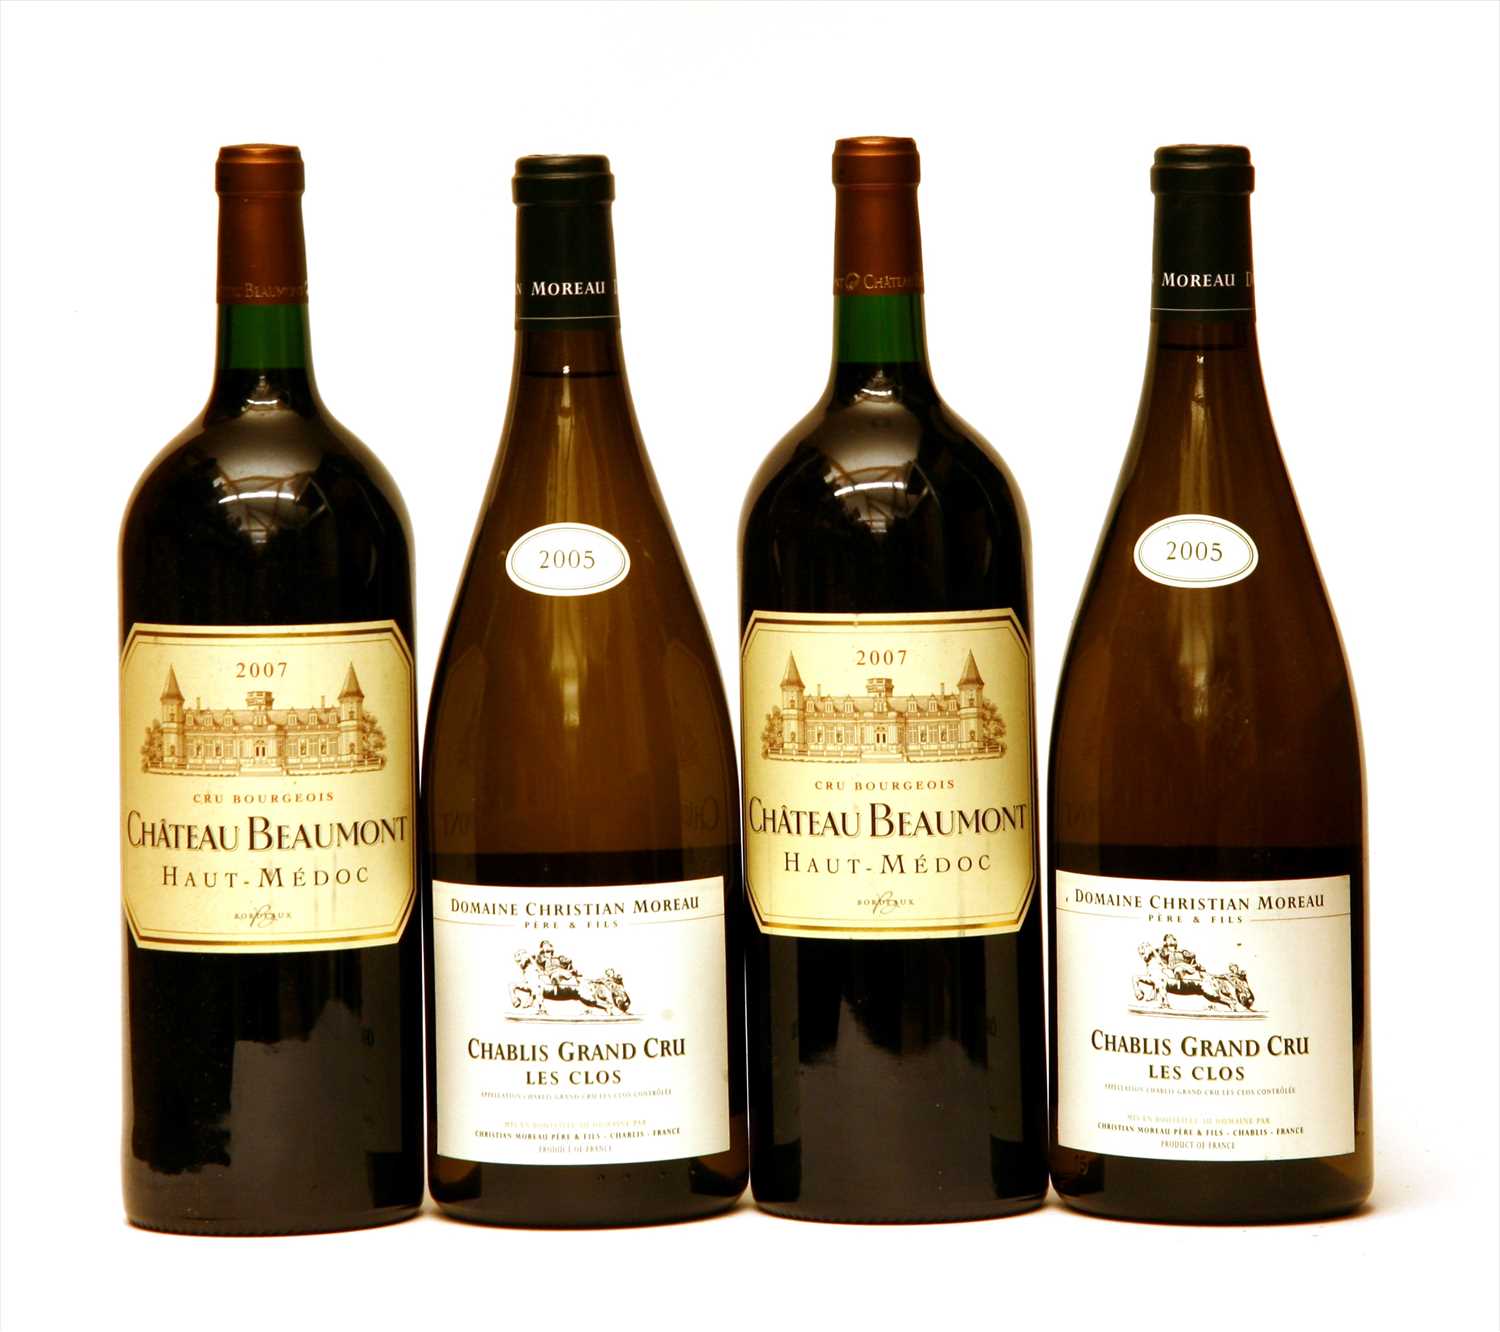 Lot 152 - Misc wines : Dom Christian Moreau Père & Fils, 2005, and Ch Beaumont, 2007, two magnums of each